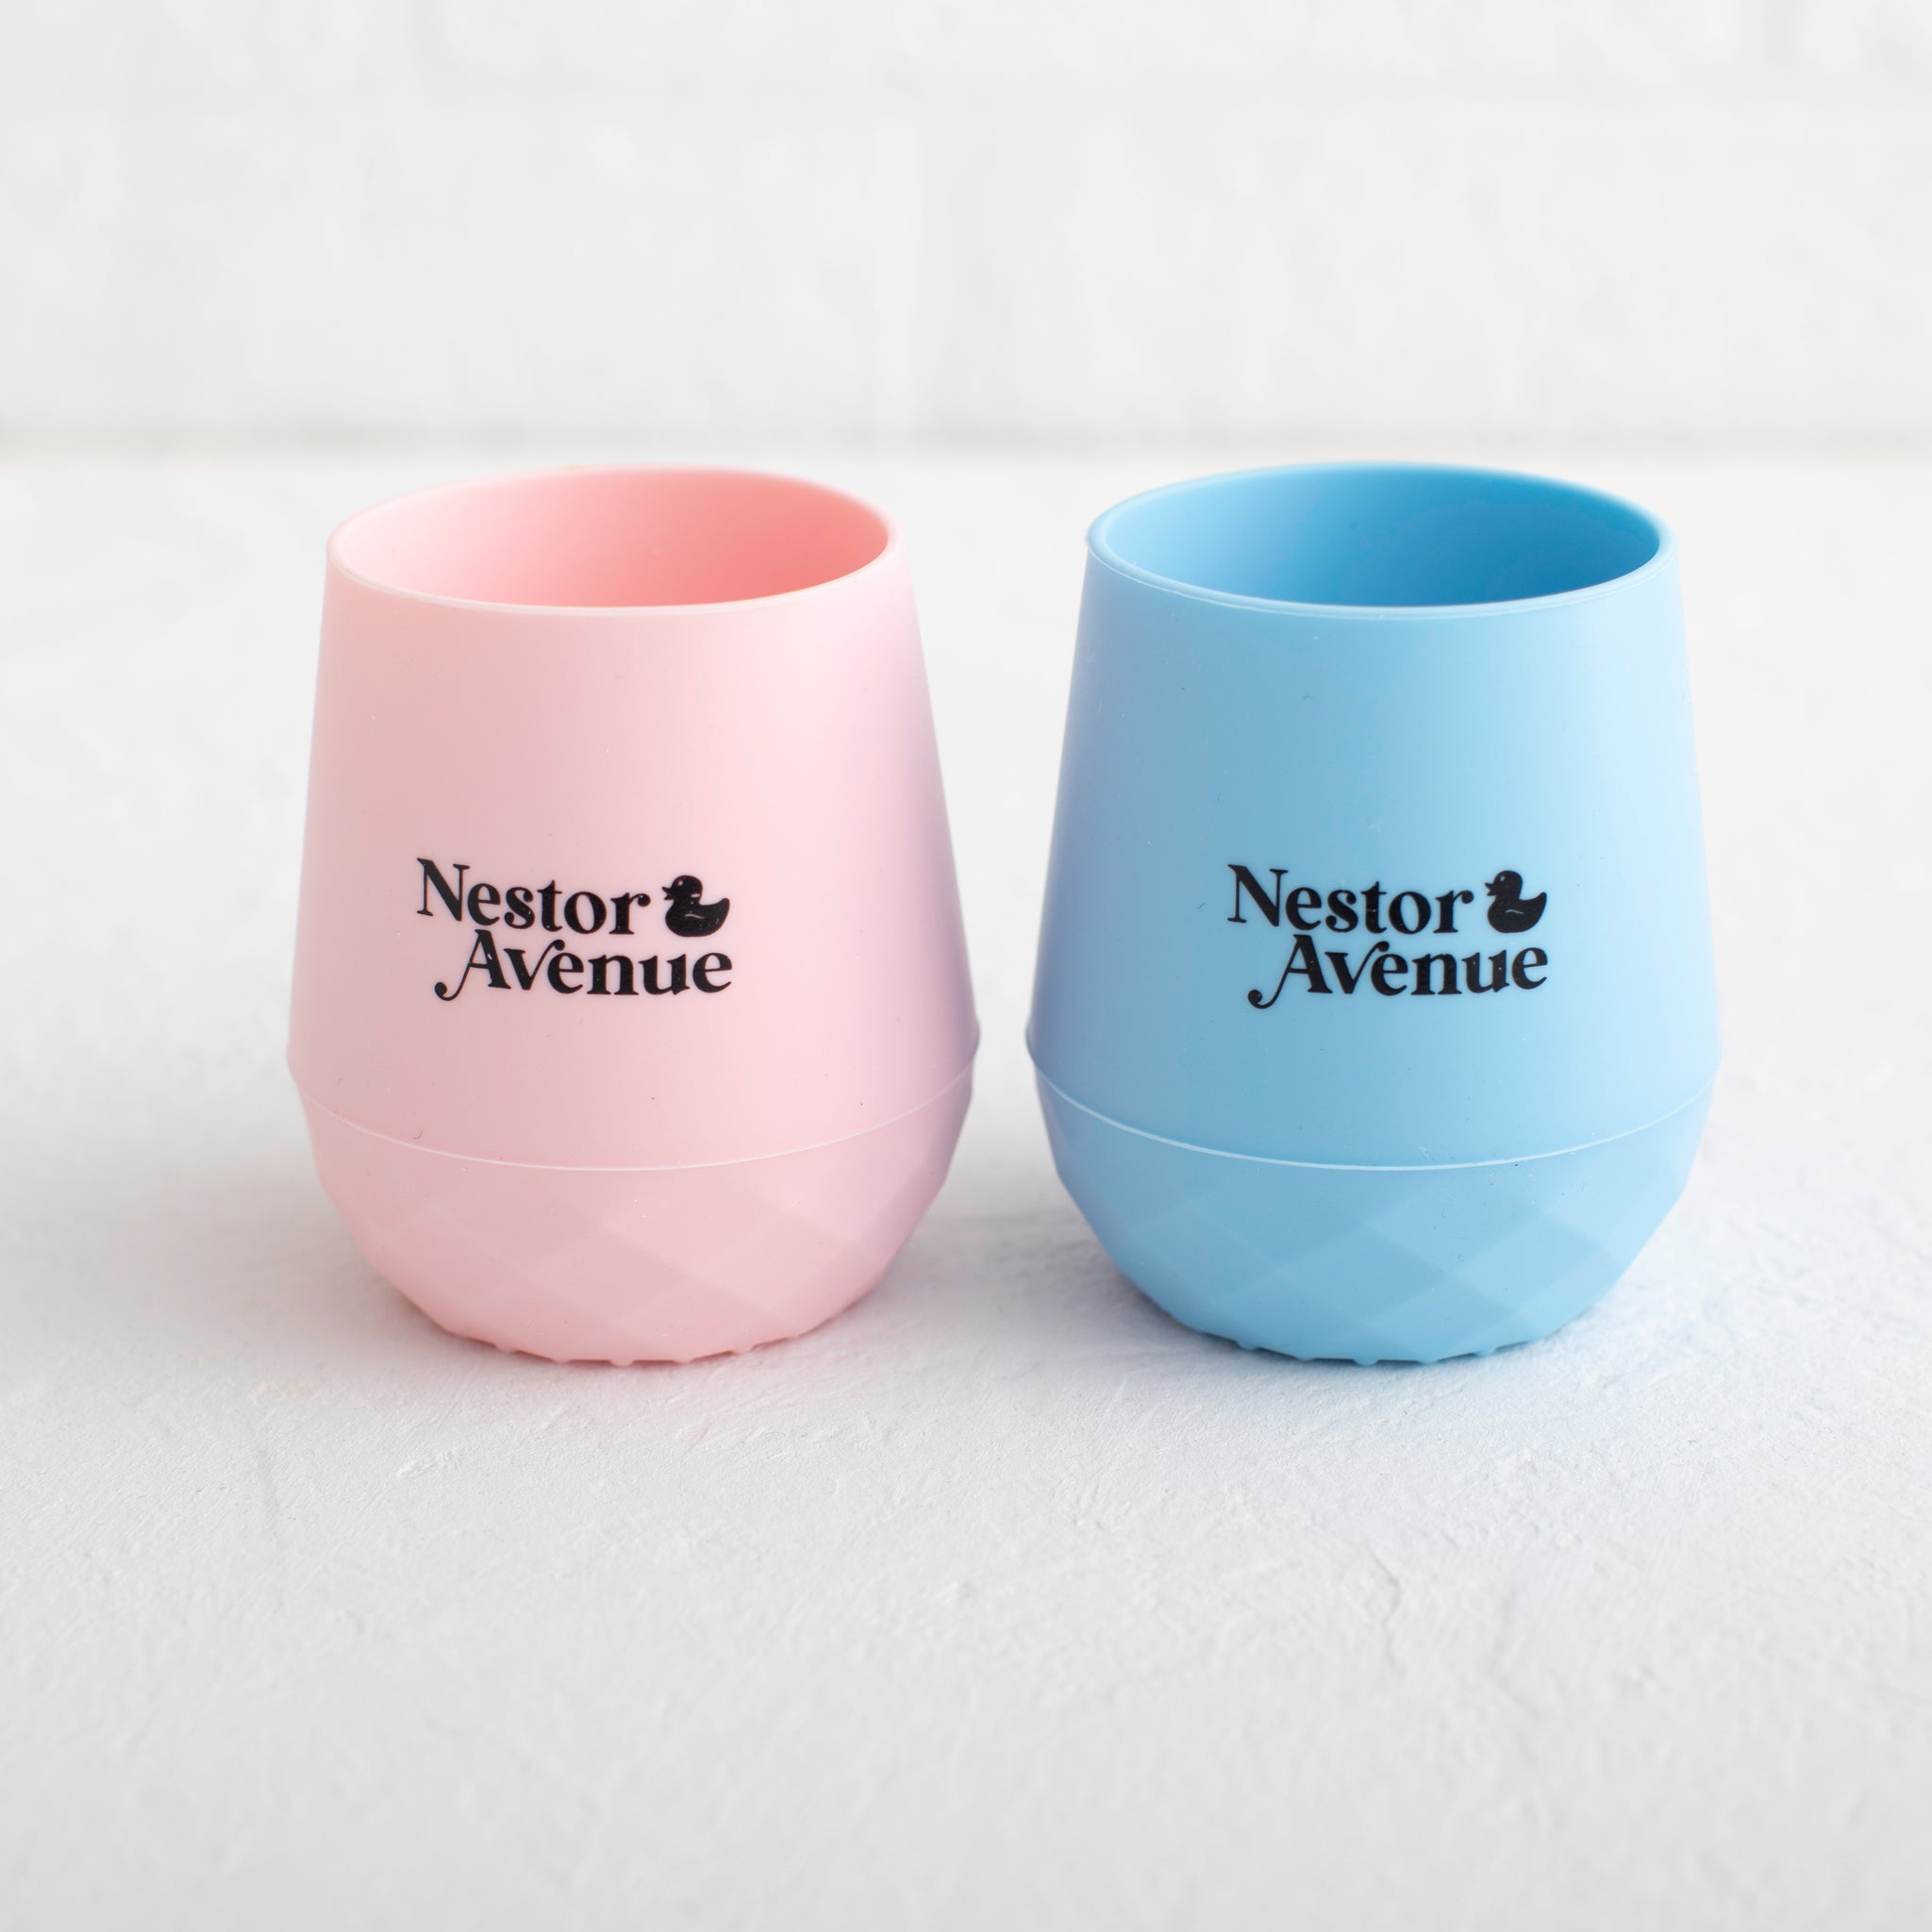 Transition Your Baby to a Cup with Our Silicone Learning Cup for